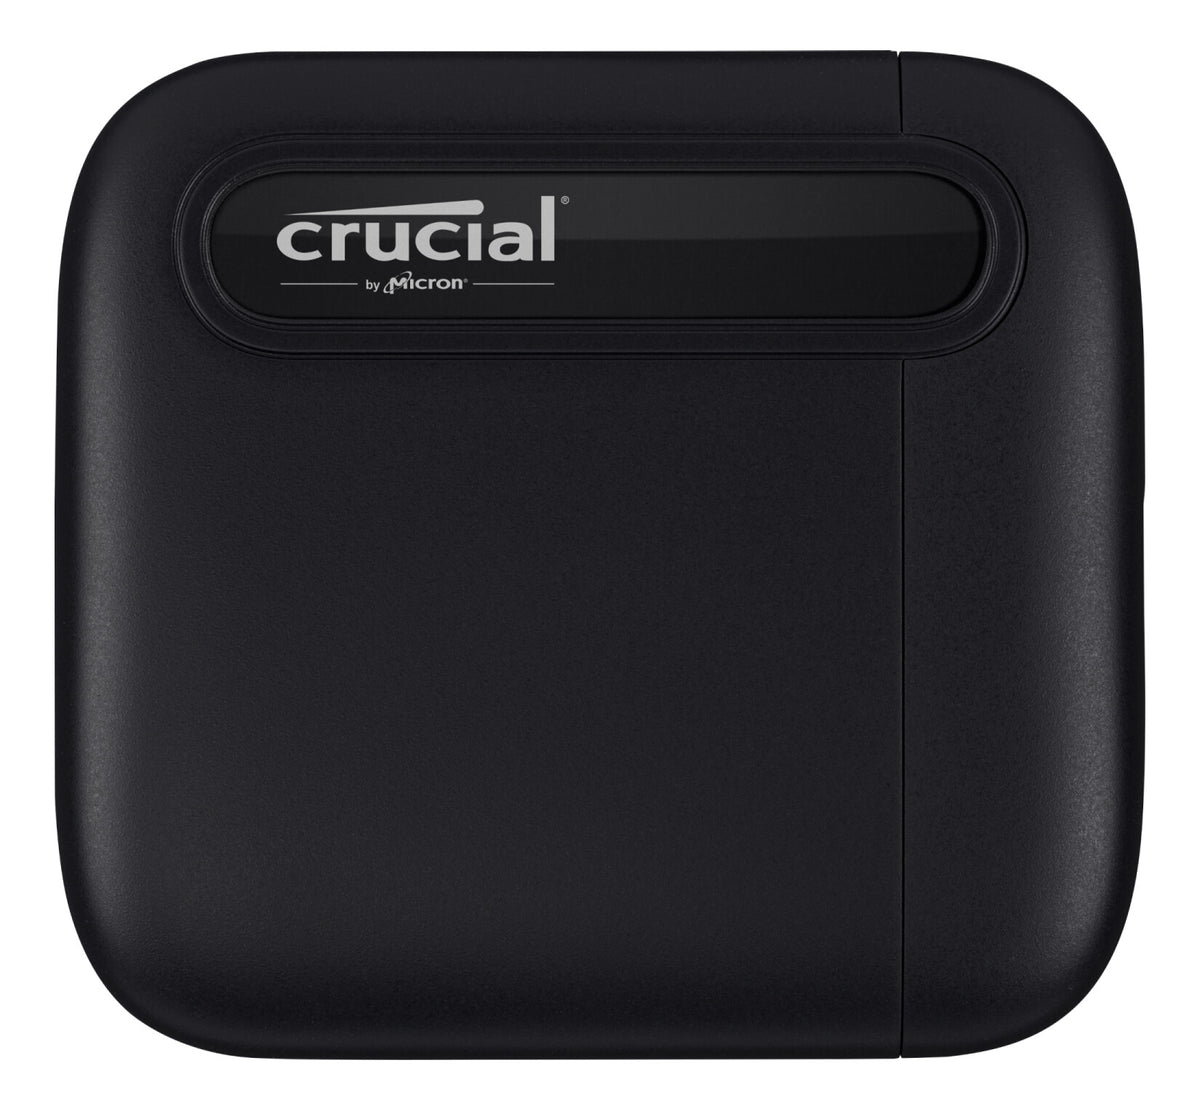 Crucial X6 - External solid state drive in Black - 500 GB